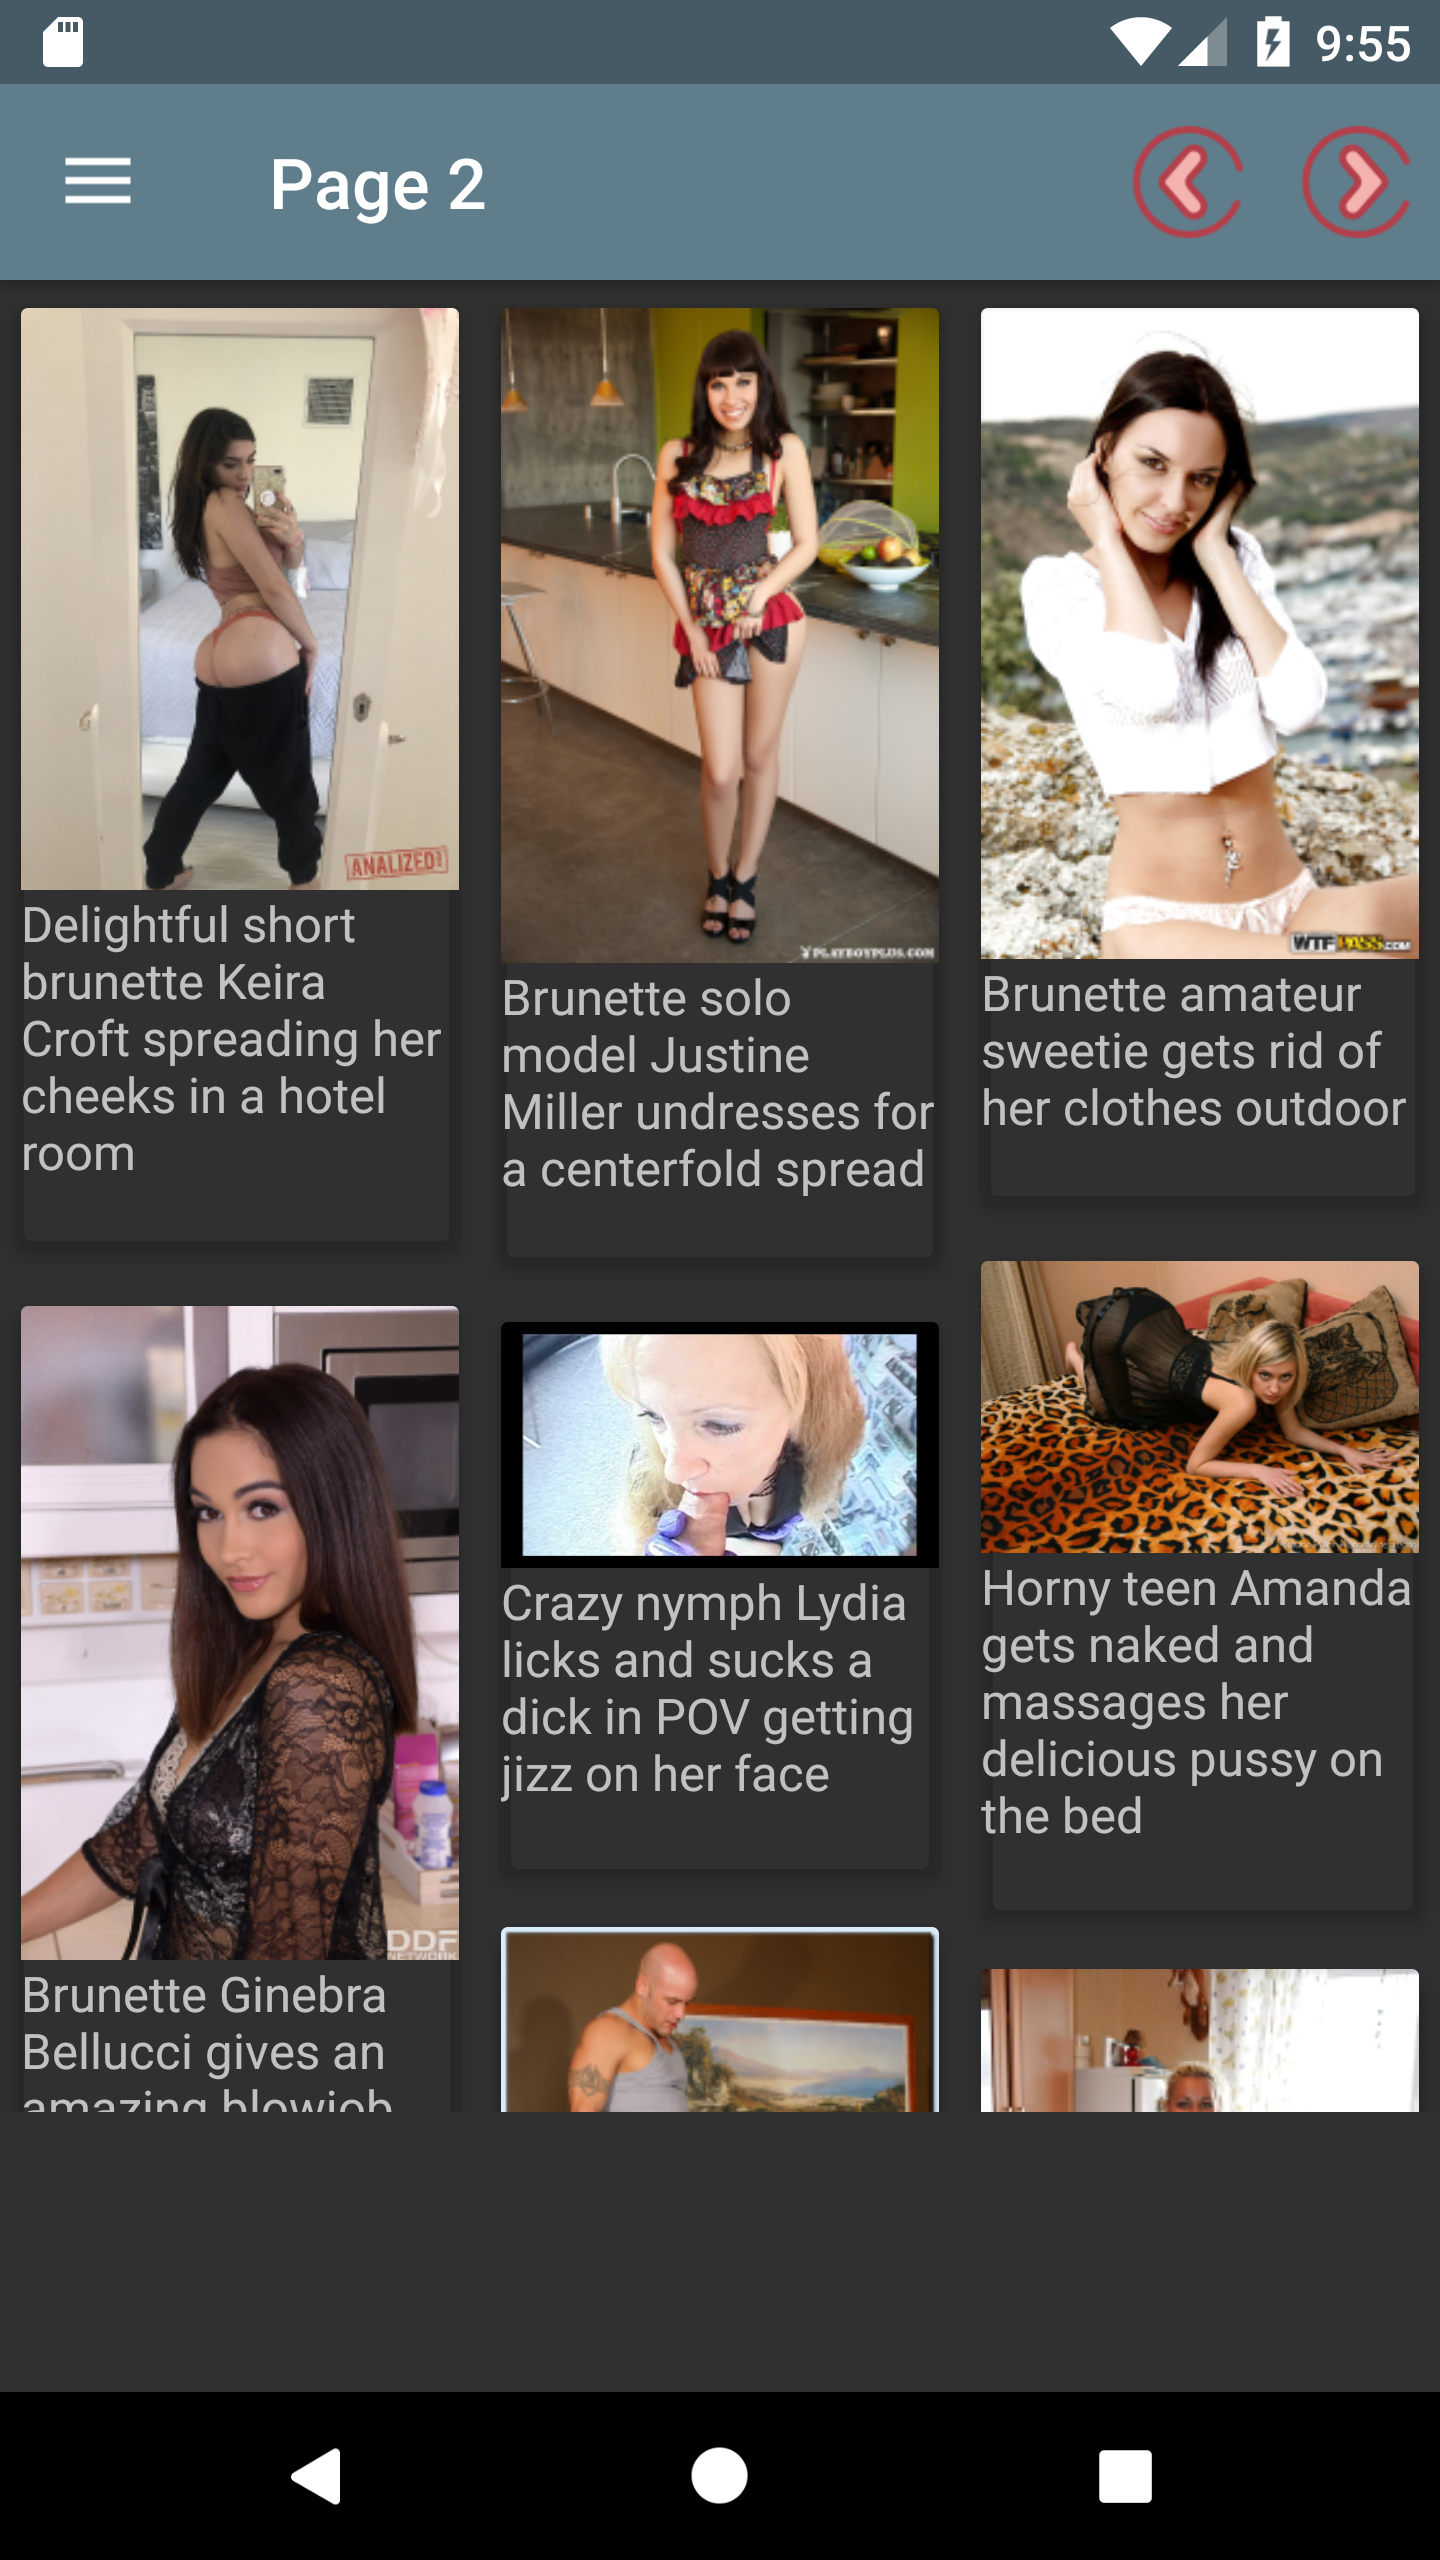 Homemade Porn galleries,photo,sexy,apk,picture,pica,gallery,mature,images,kristinf,apps,hot,pornstars,manga,android,cosplay,adult,pics,porn,hentai,download